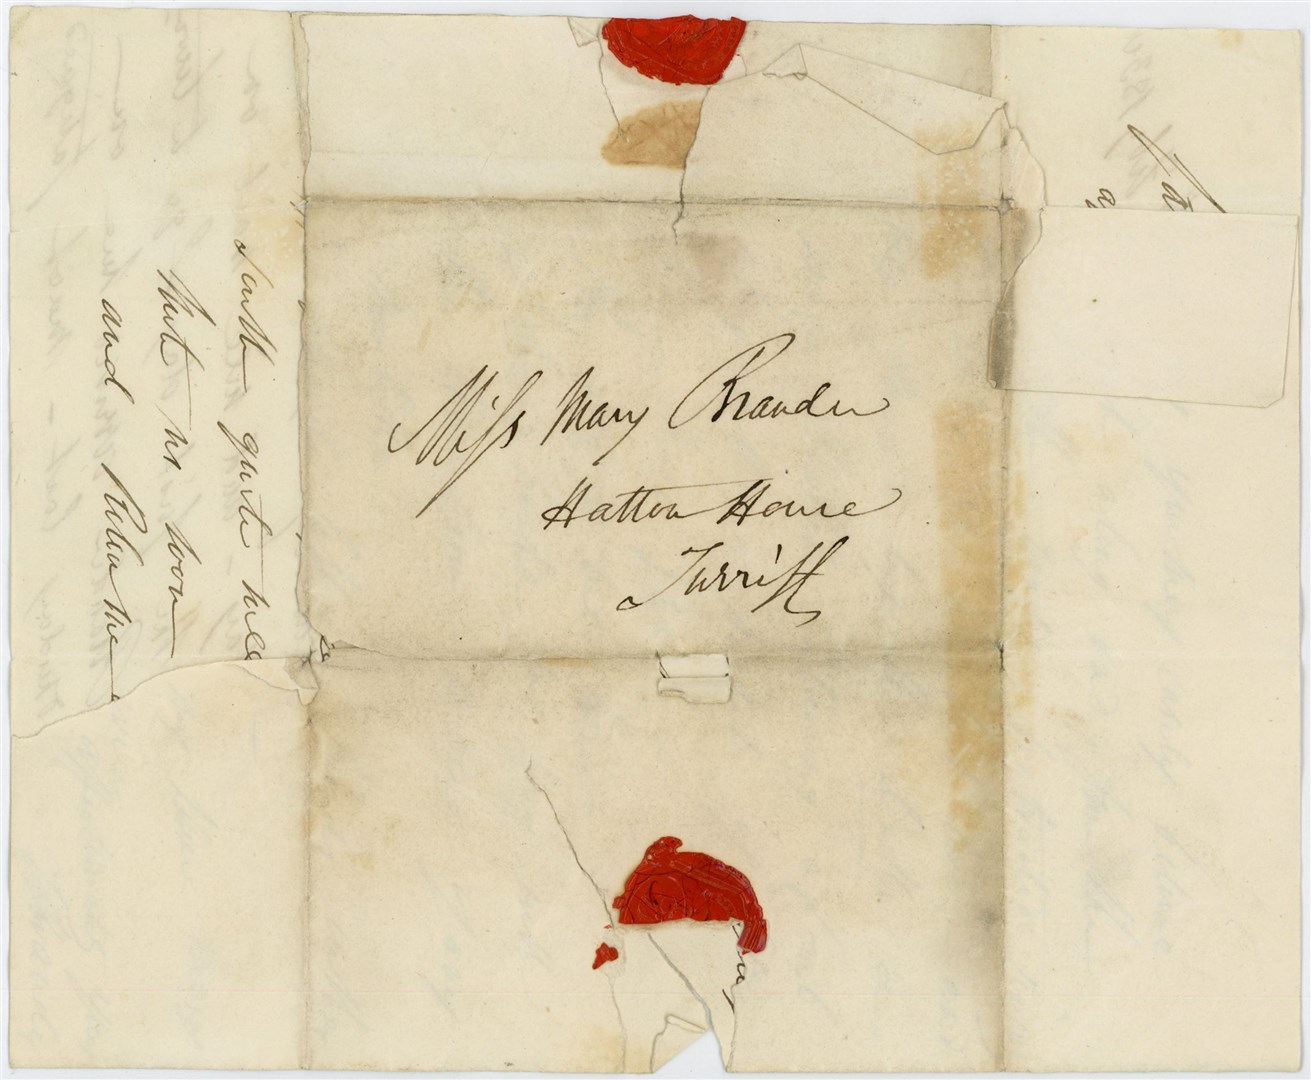 A letter posted to Turriff with the original sealing wax included.